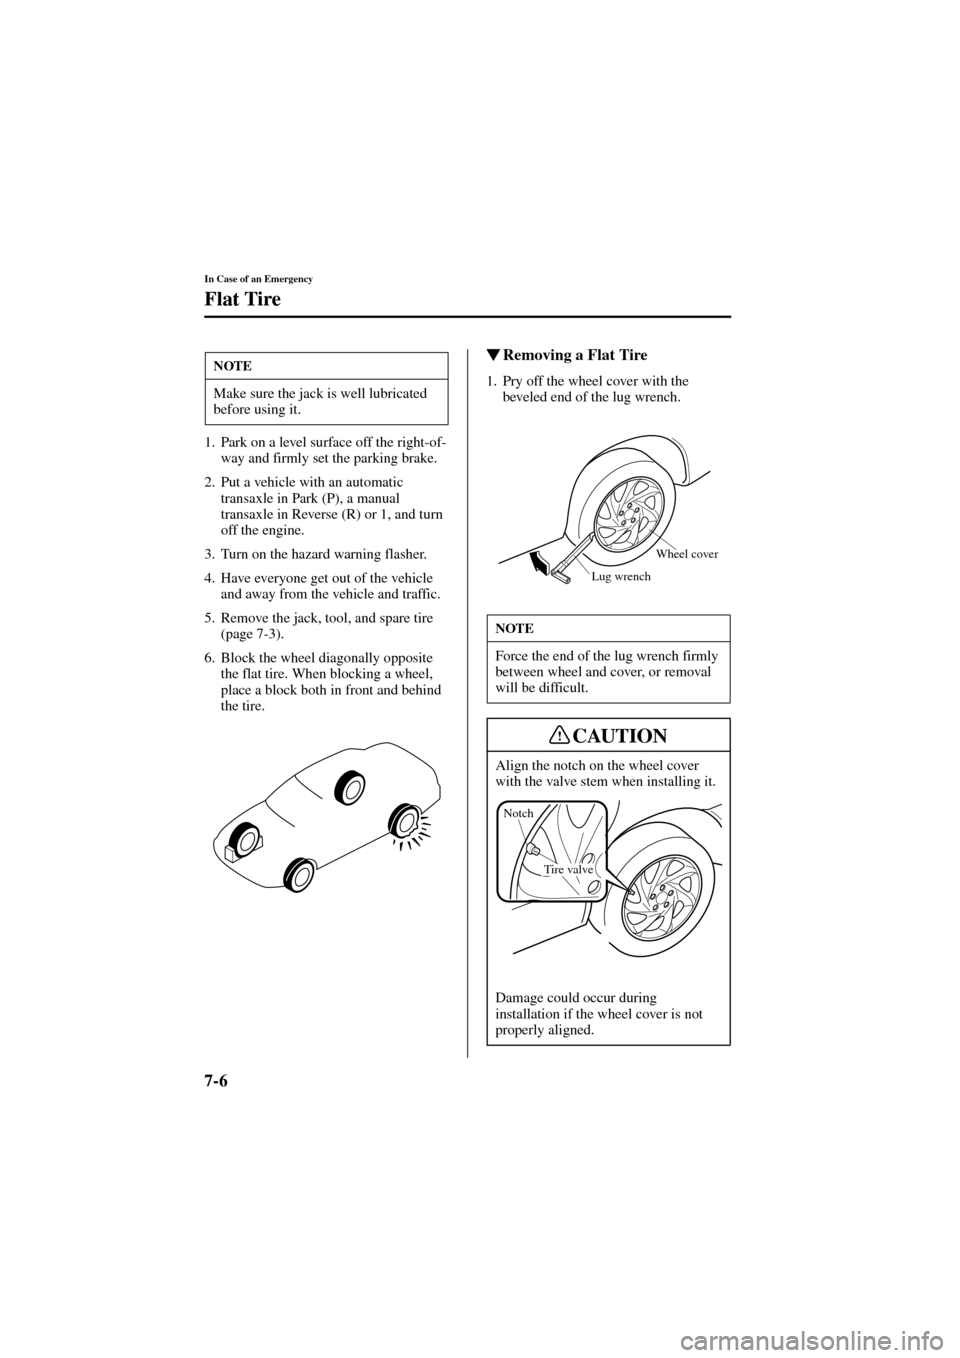 MAZDA MODEL 6 2004  Owners Manual (in English) 7-6
In Case of an Emergency
Flat Tire
Form No. 8R29-EA-02I
1. Park on a level surface off the right-of-
way and firmly set the parking brake.
2. Put a vehicle with an automatic 
transaxle in Park (P),